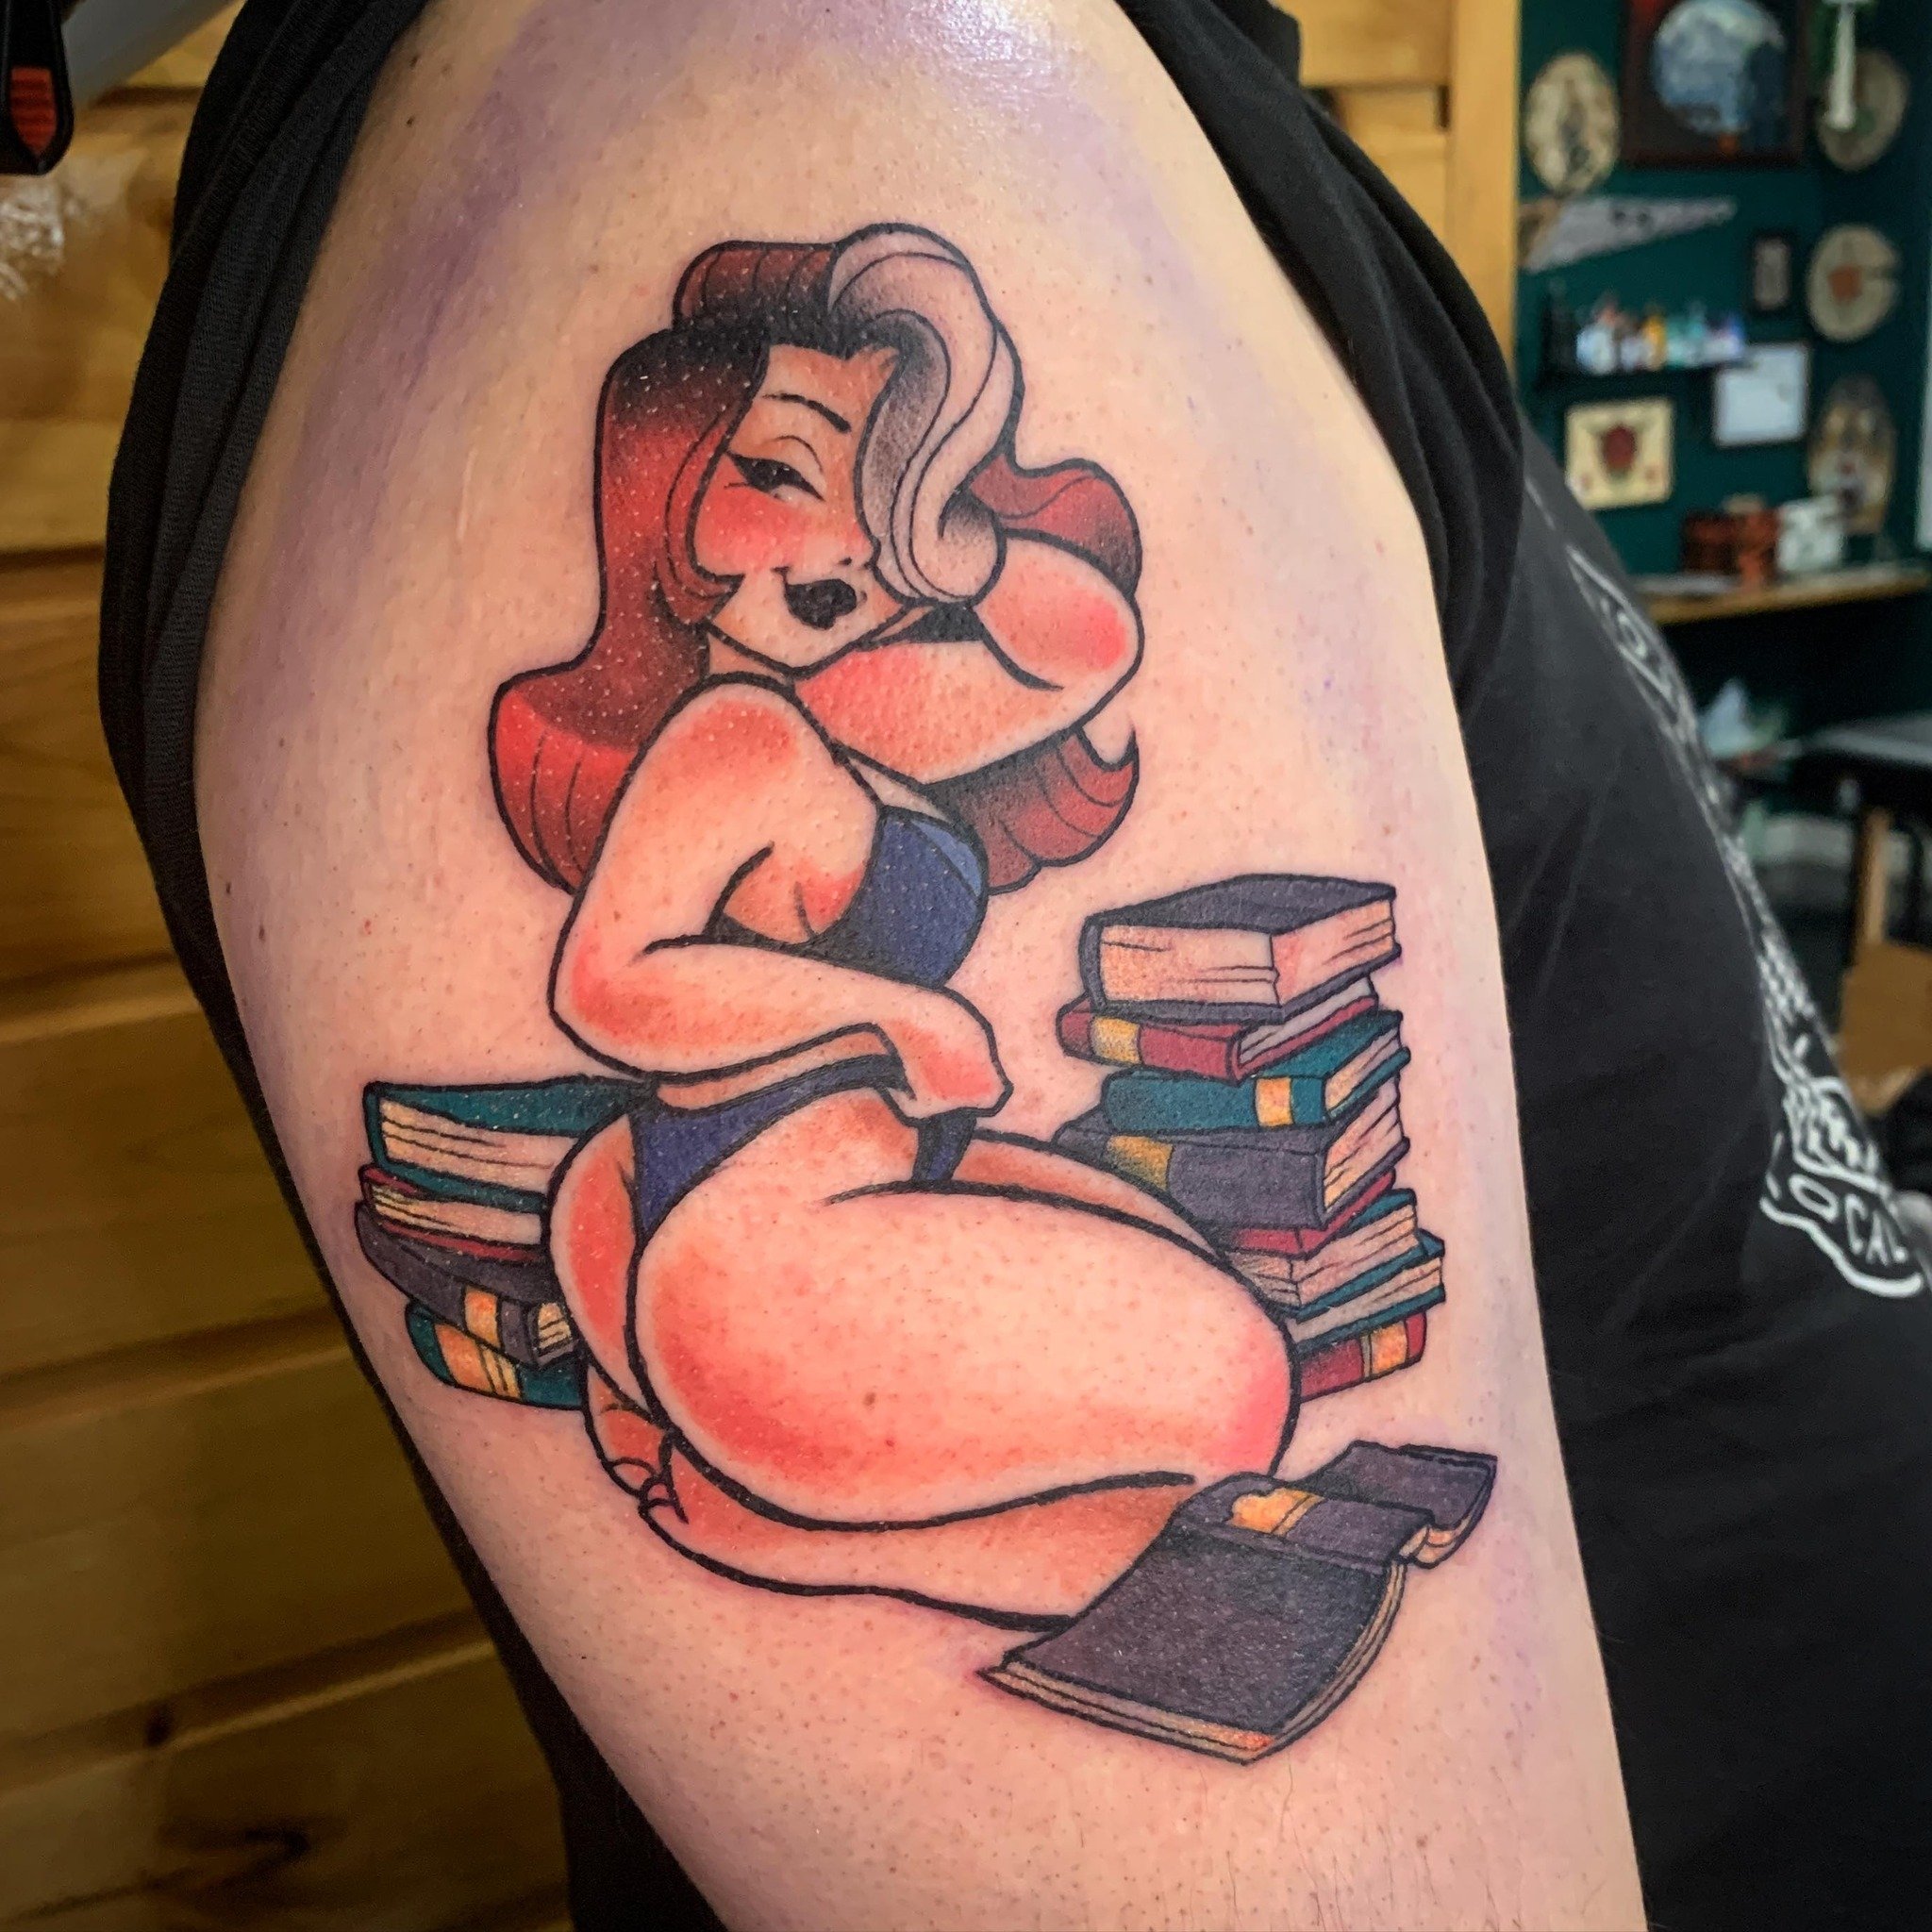 Who doesn&rsquo;t love a good book?
Done at @vilainstattoo 
.
.
.
***I&rsquo;m only designing tattoos for people who can come to Montreal to get the tattoo. I won&rsquo;t answer messages otherwise. Please don&rsquo;t use my art without my consent.***